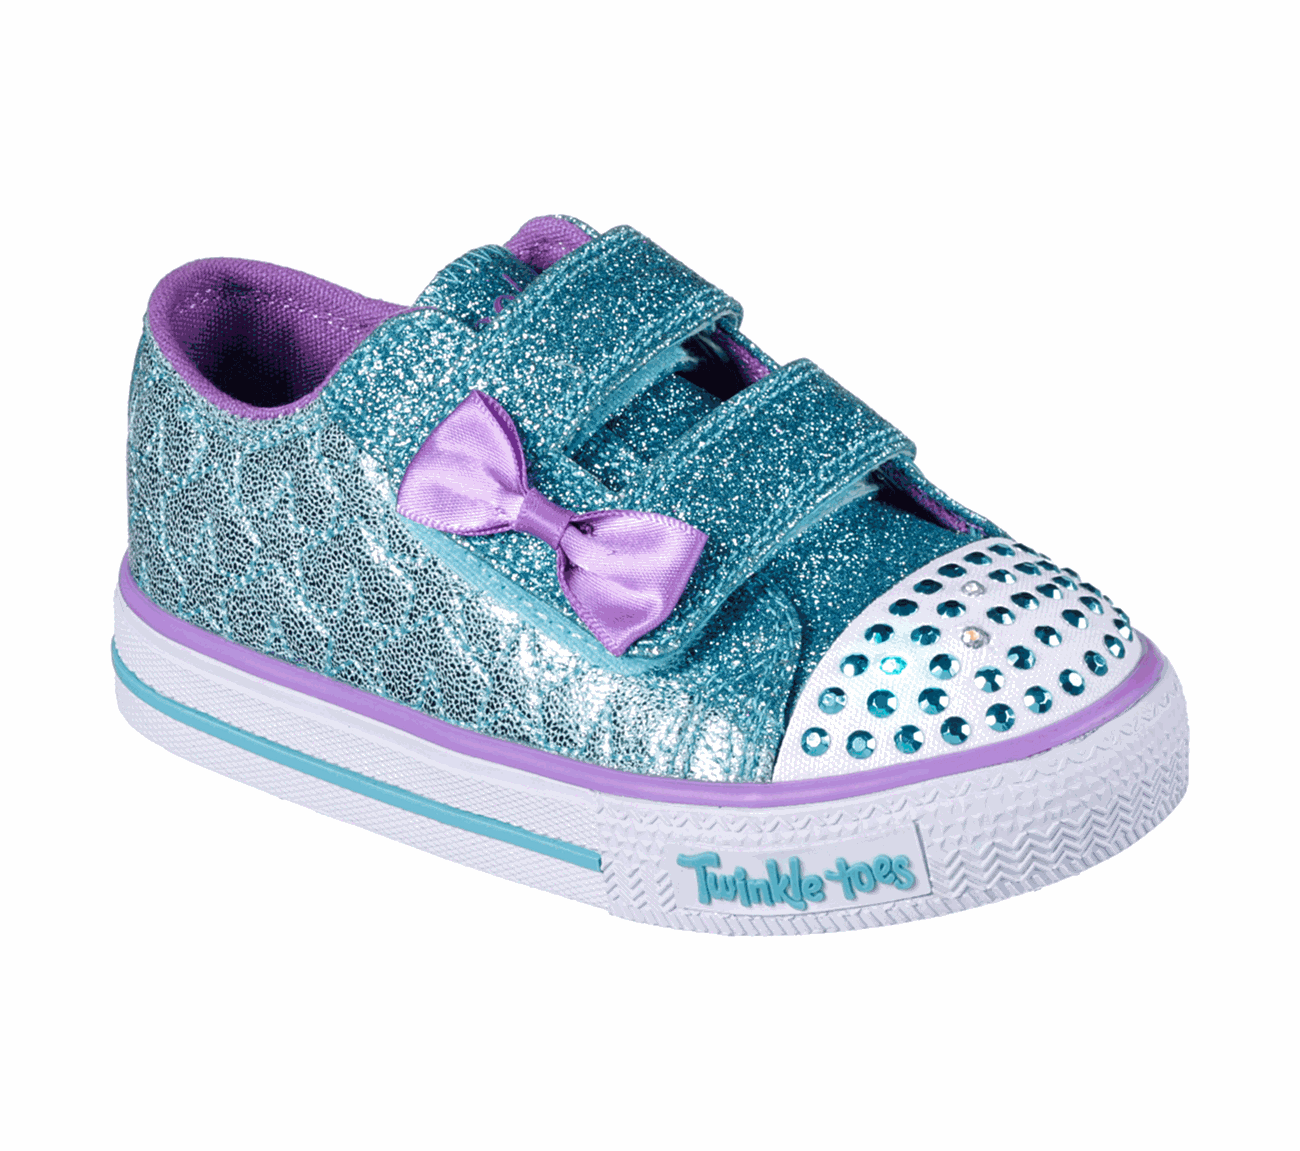 Buy SKECHERS Twinkle Toes: Shuffles - Starlight Style S-Lights Shoes